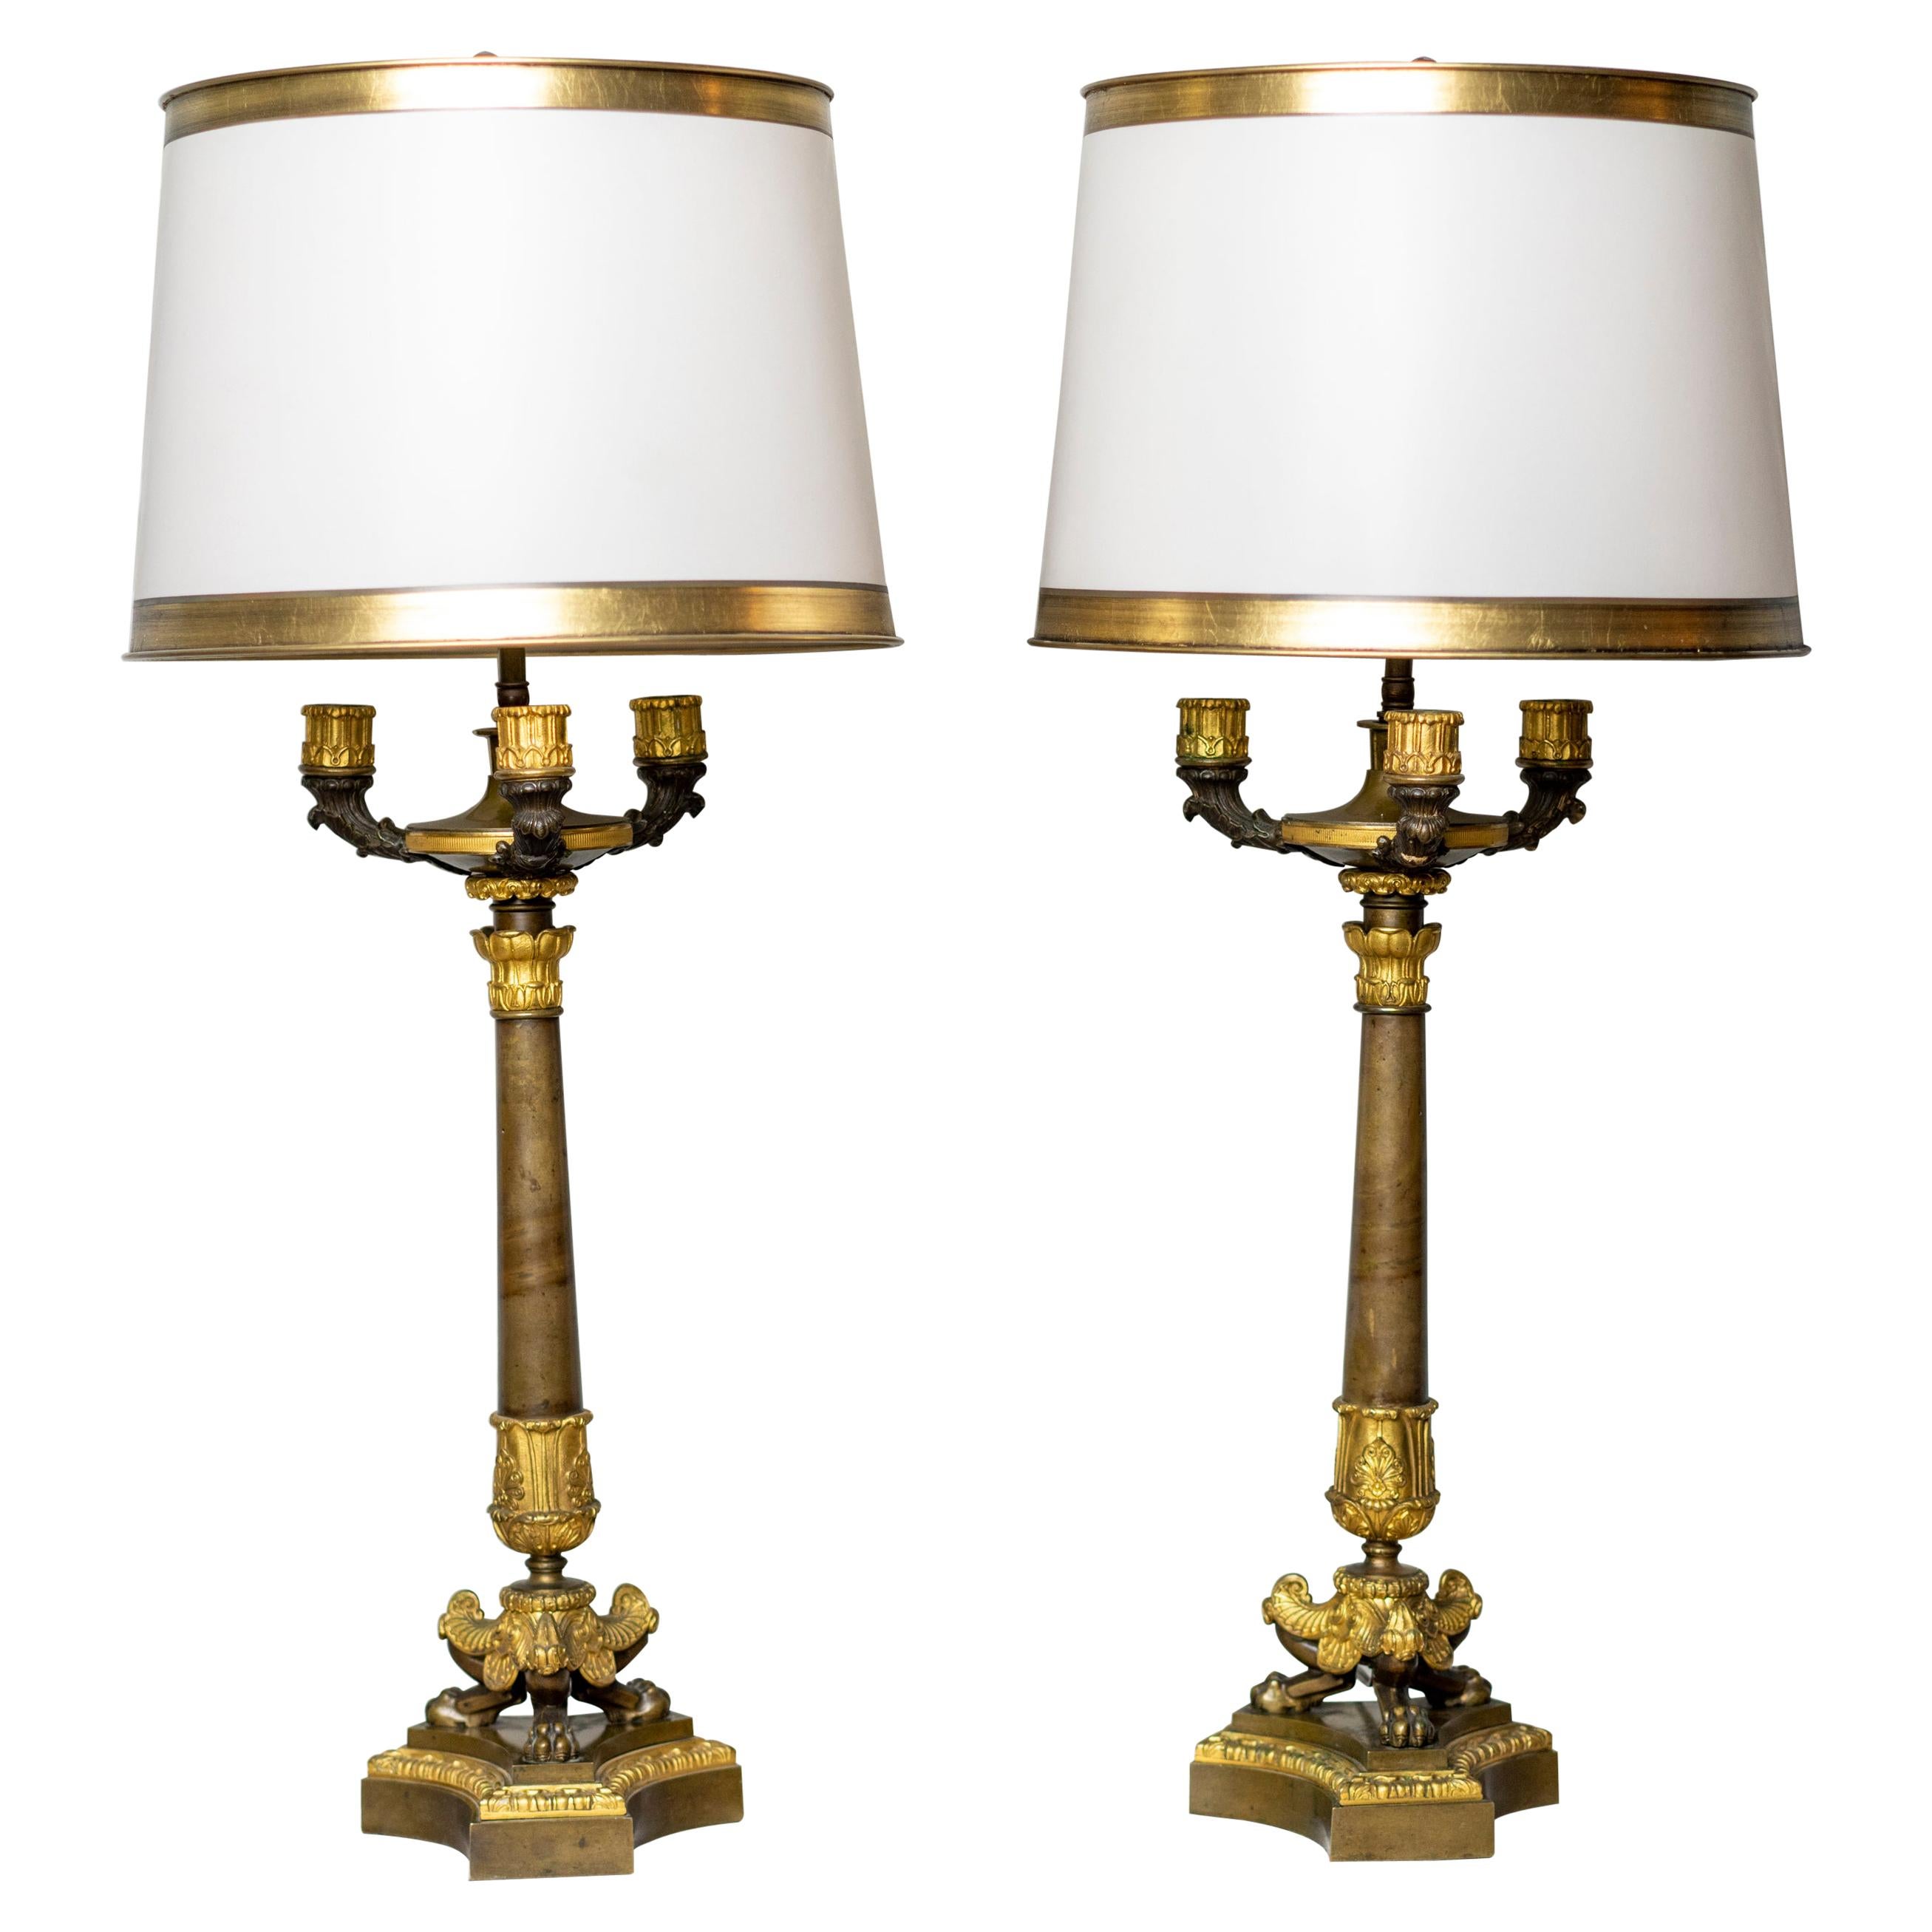 Pair of Gilt and Patinated Bronze Restauration Period Candelabra Lamps For Sale